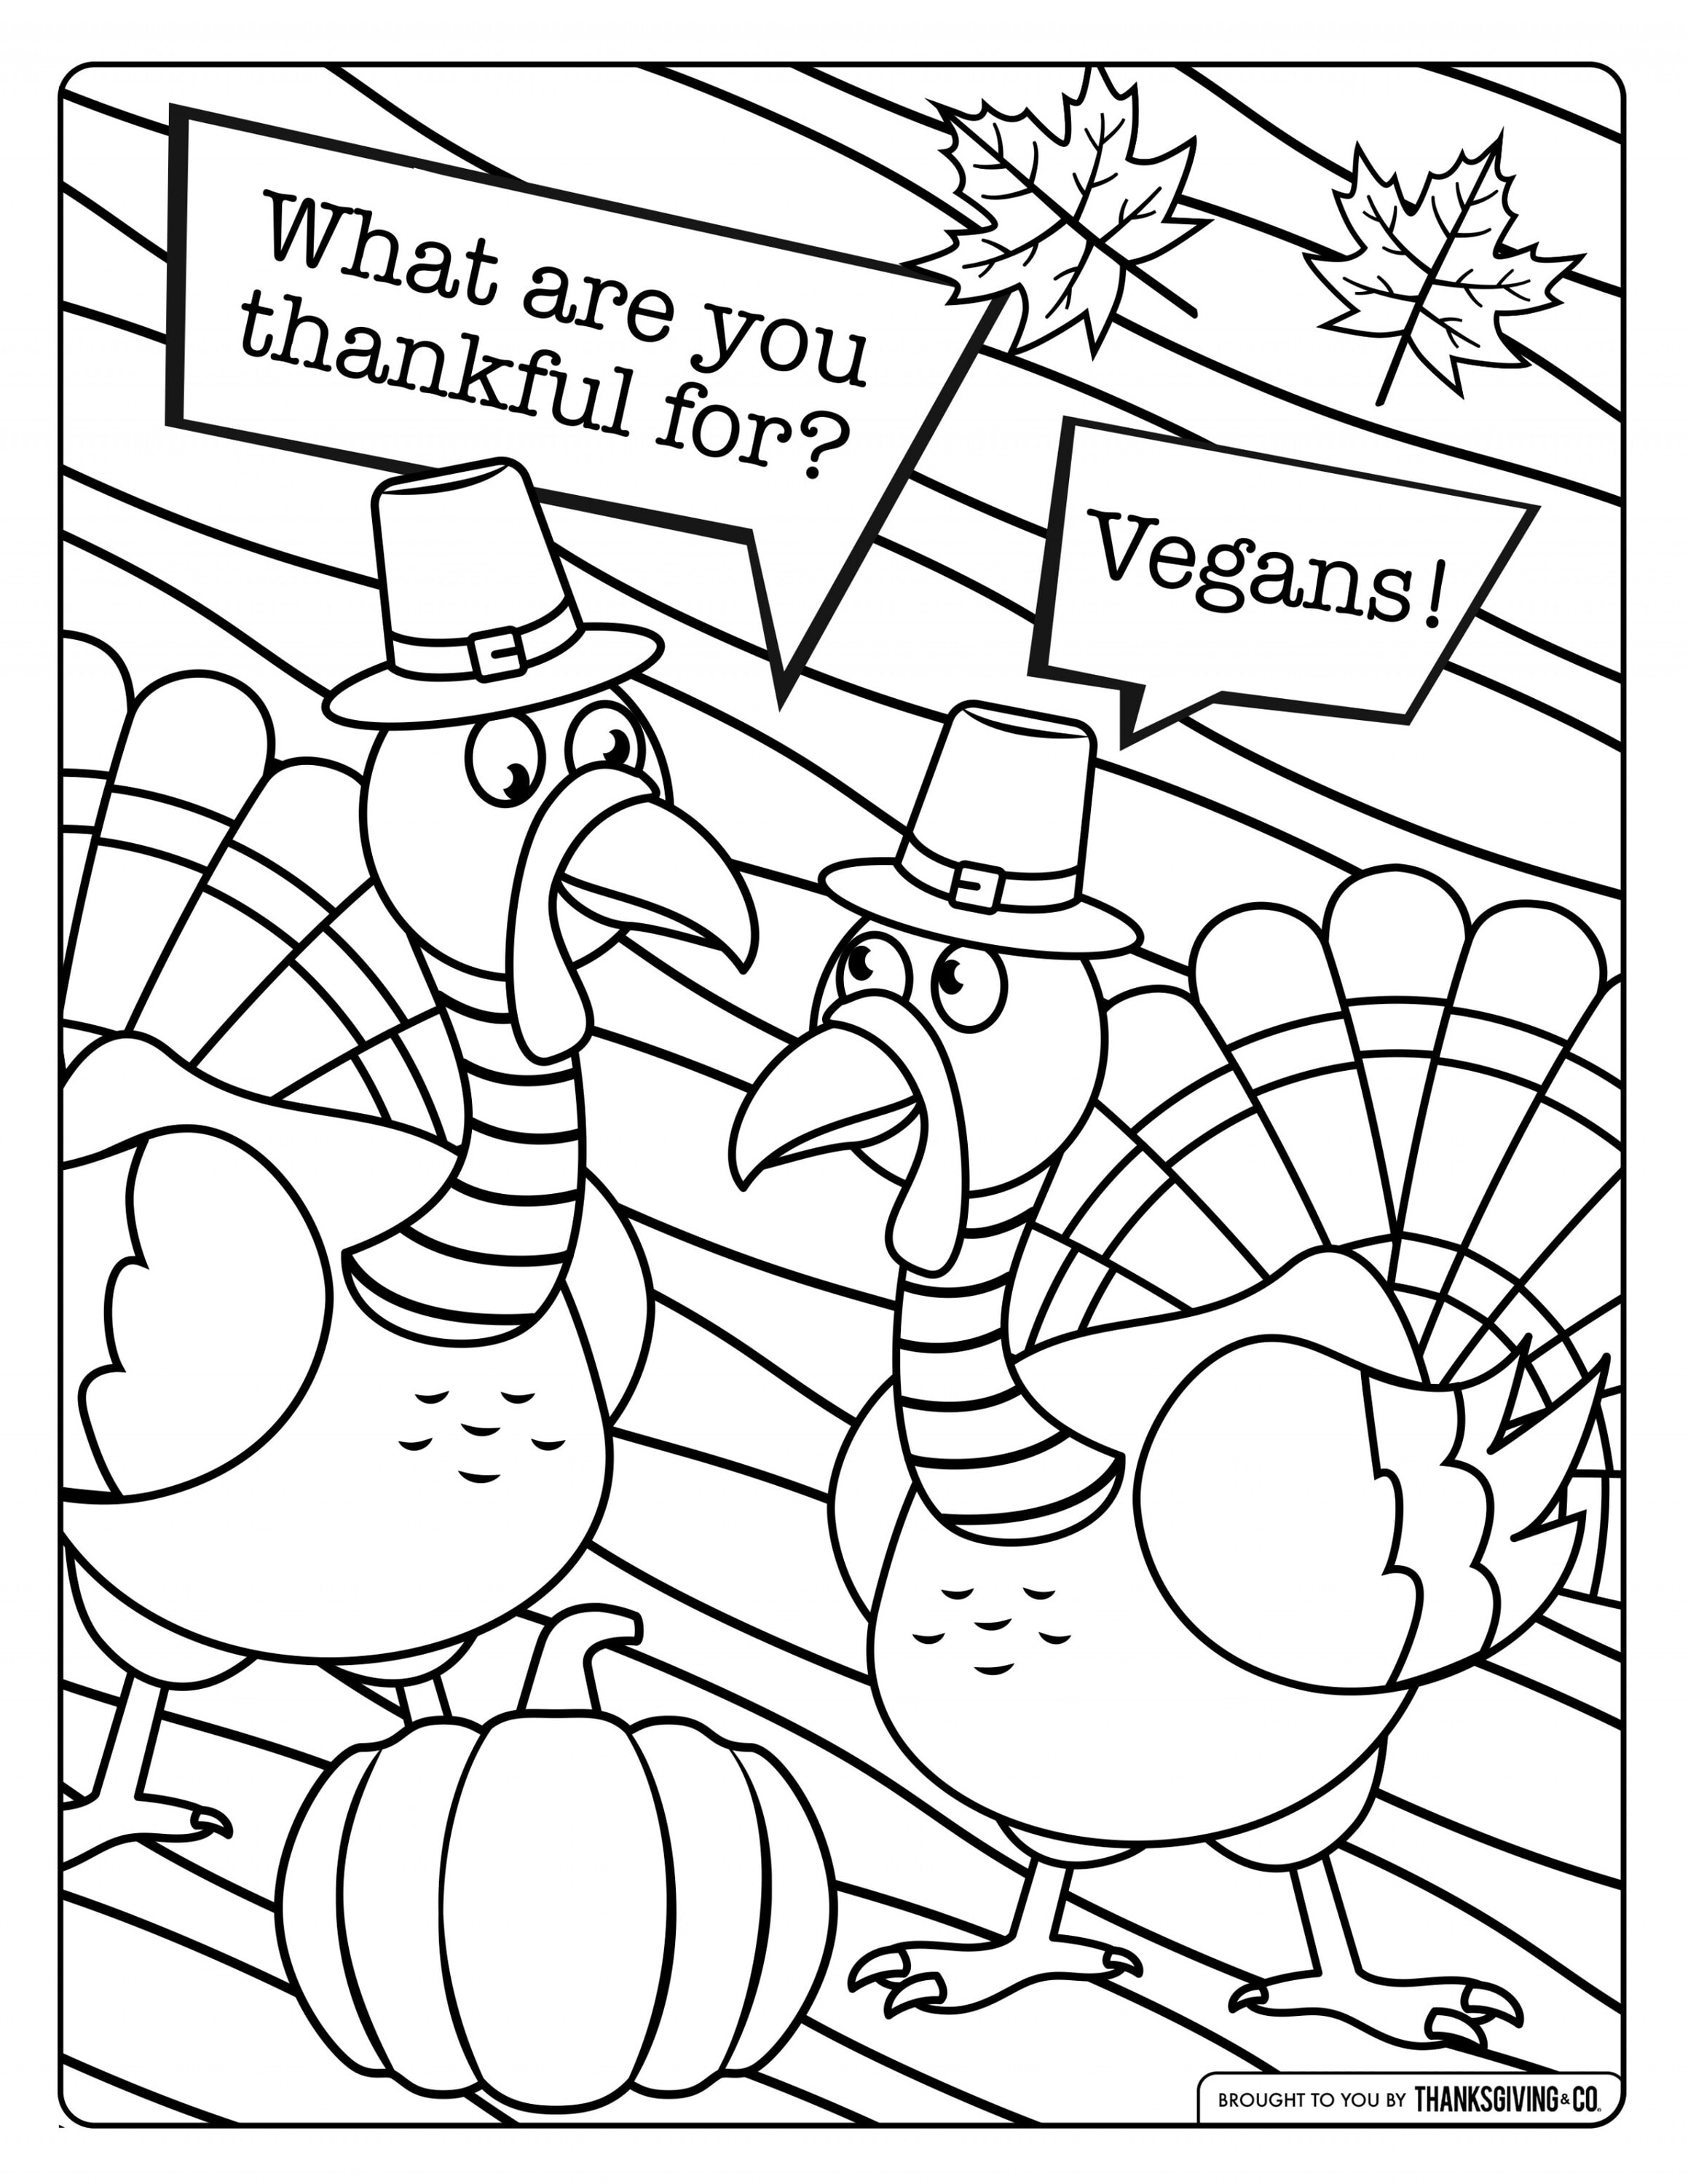 Friendsgiving adult coloring pages turkeys